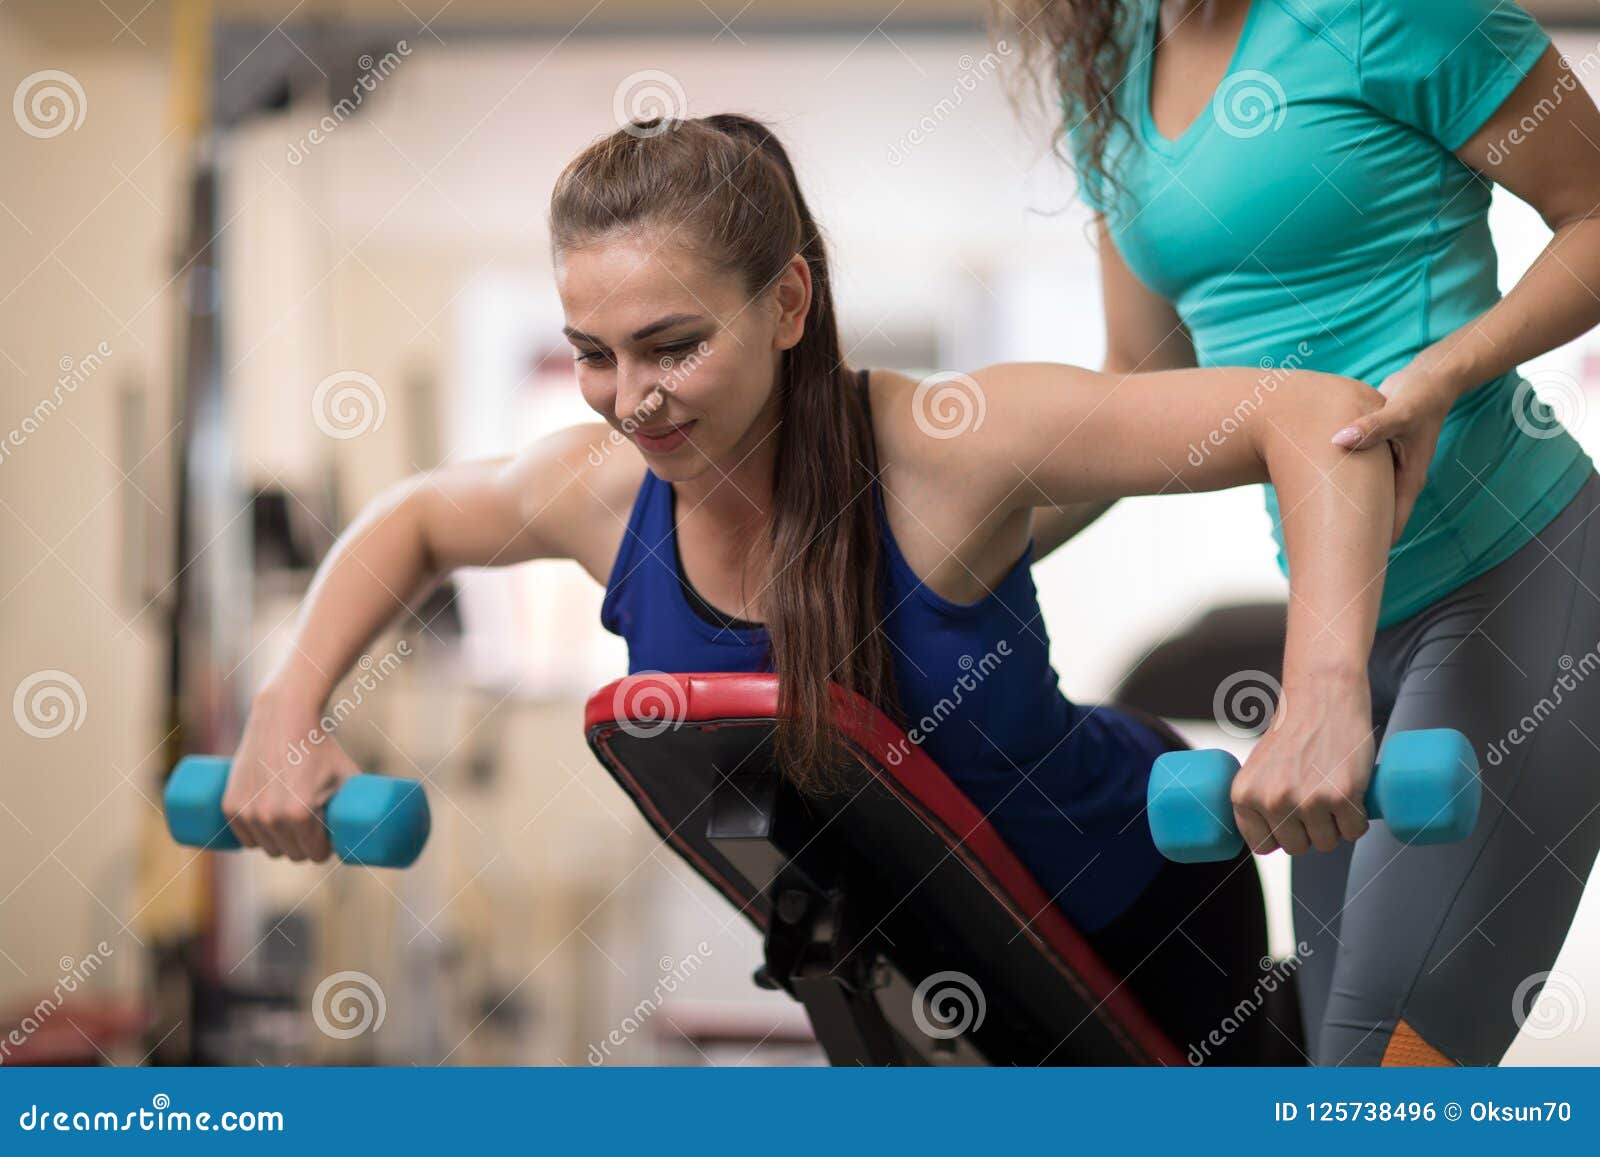 Personal Trainer Gym Images – Browse 105,530 Stock Photos, Vectors